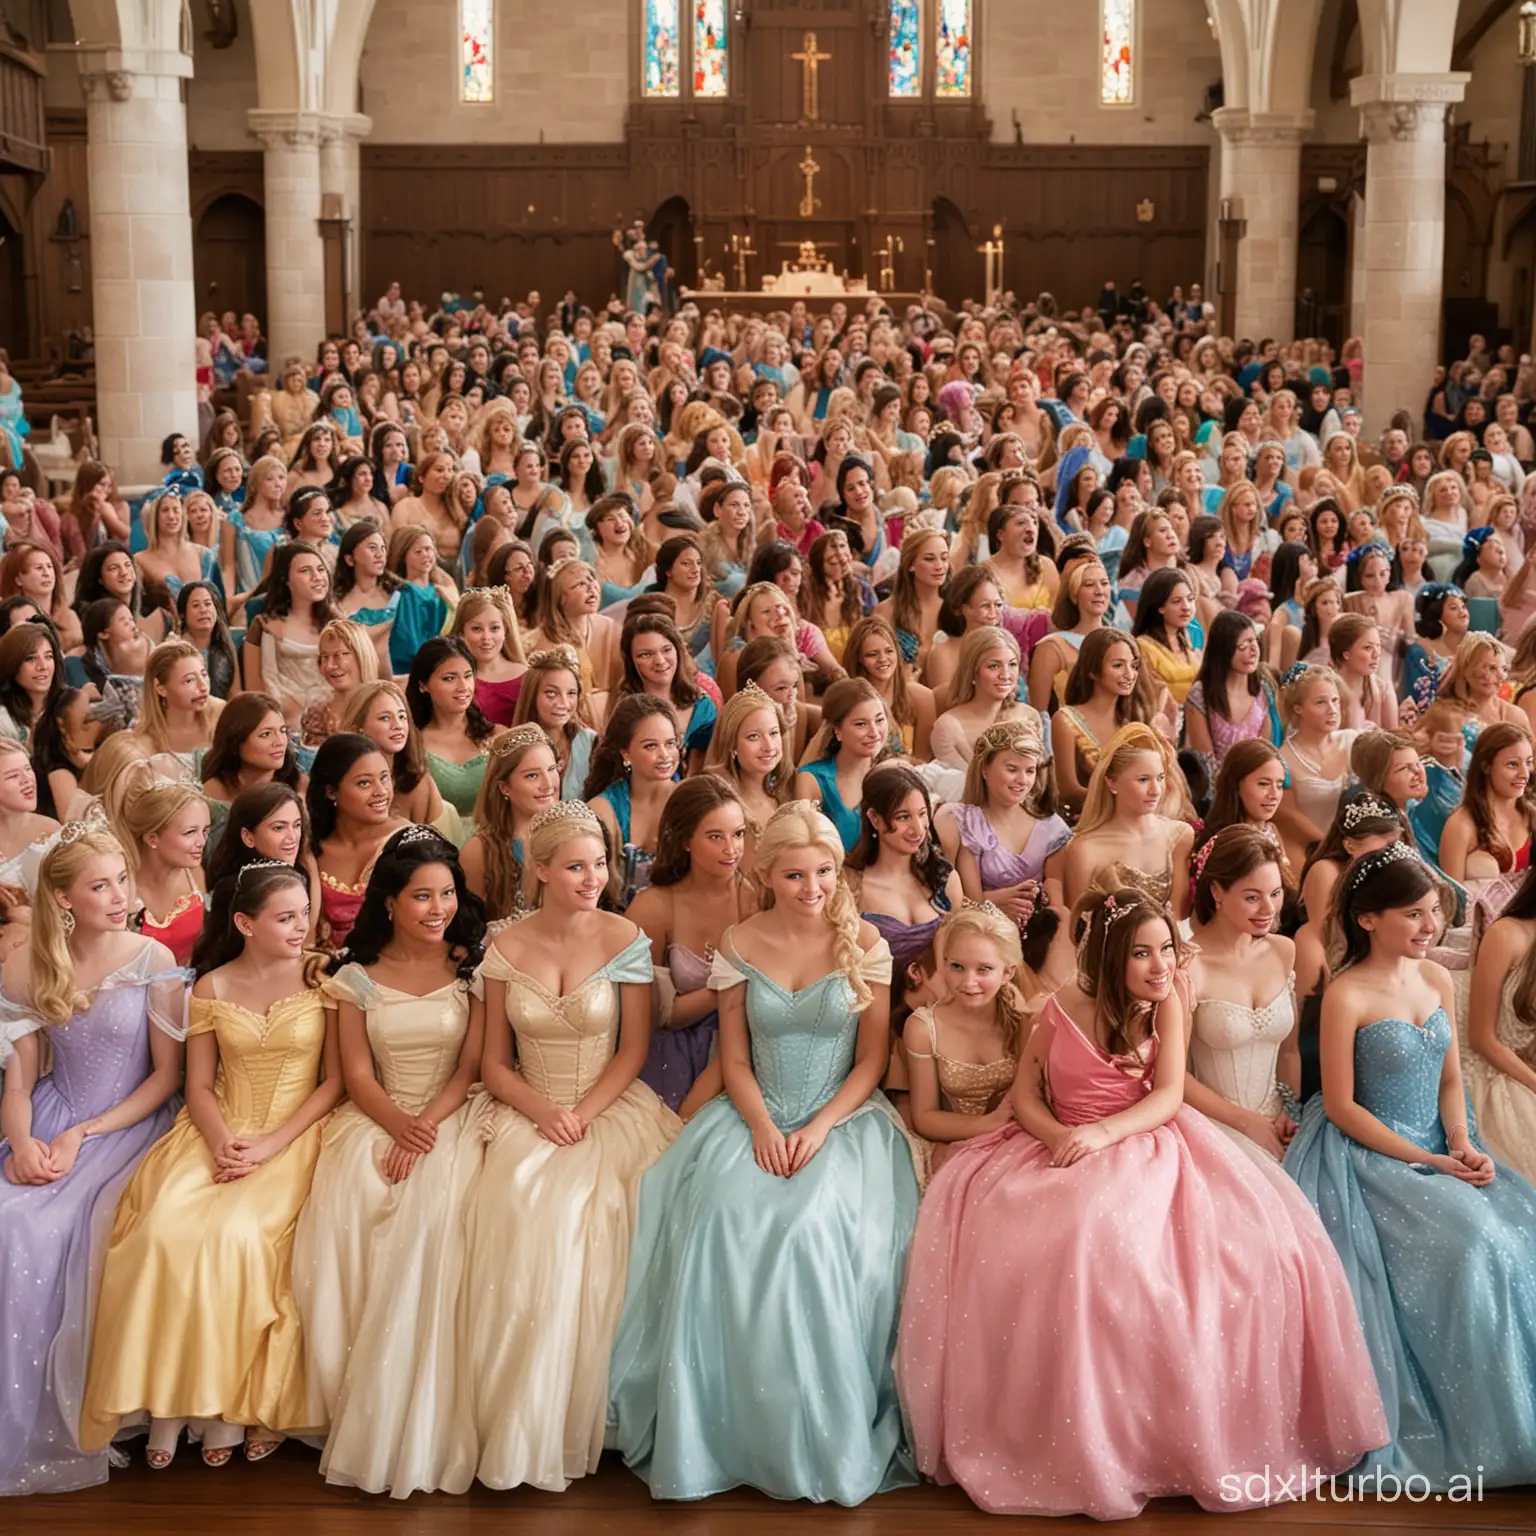 Crowd of Disney princesses gathered sitting in the church